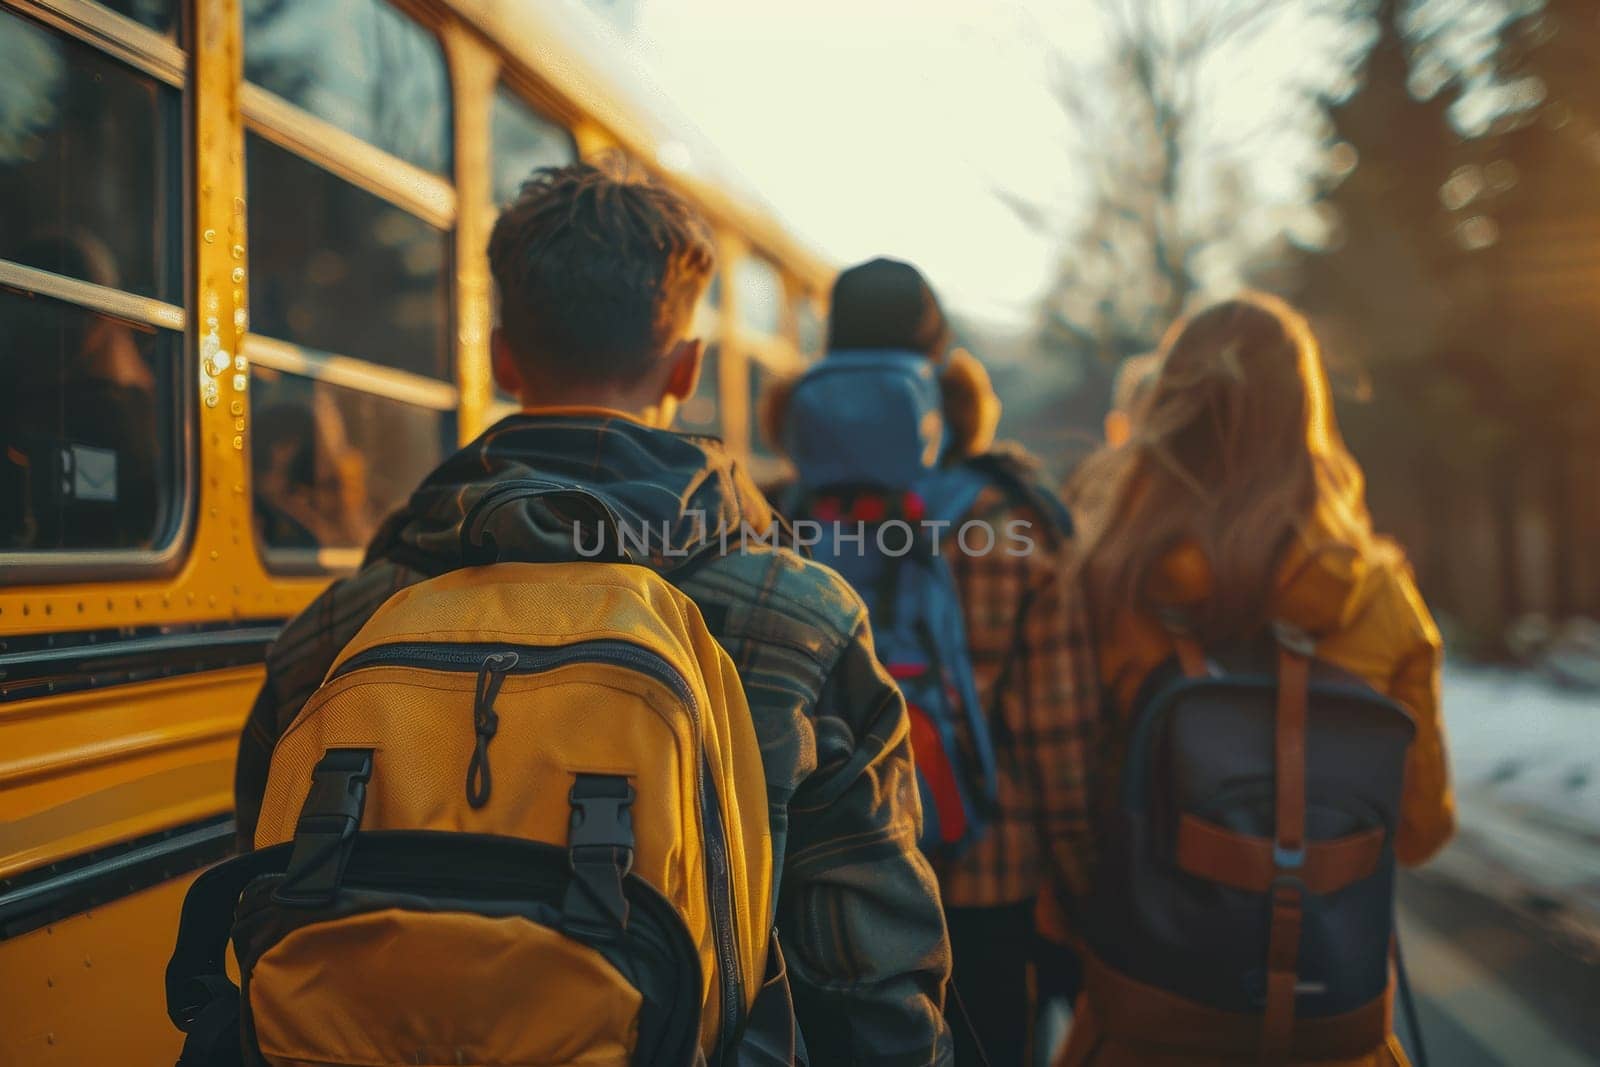 A group of people are walking out of a yellow school bus. They are all carrying backpacks and one of them is wearing a plaid jacket. Scene is casual and relaxed